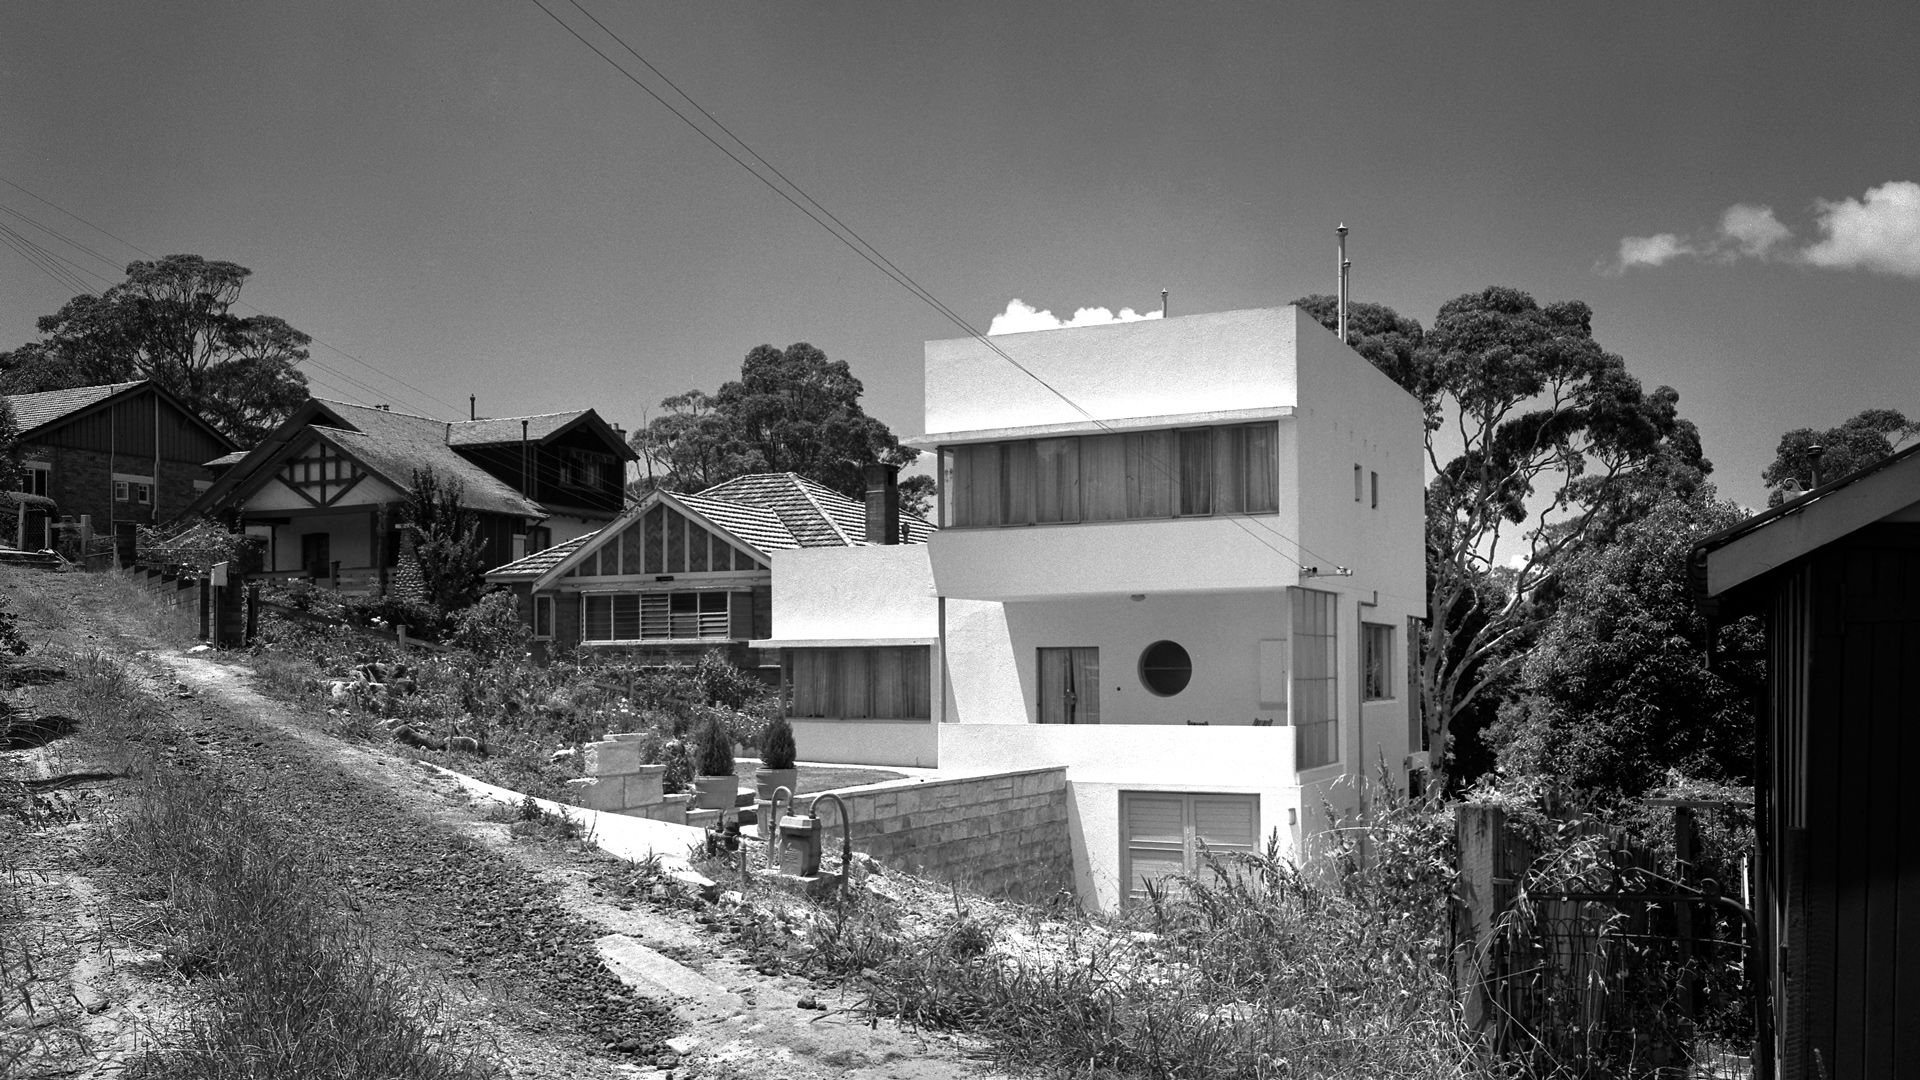 Chaim Hillman house, 40 Findlay Ave, Roseville 1950 © Max Dupain Archives, State Library of NSW